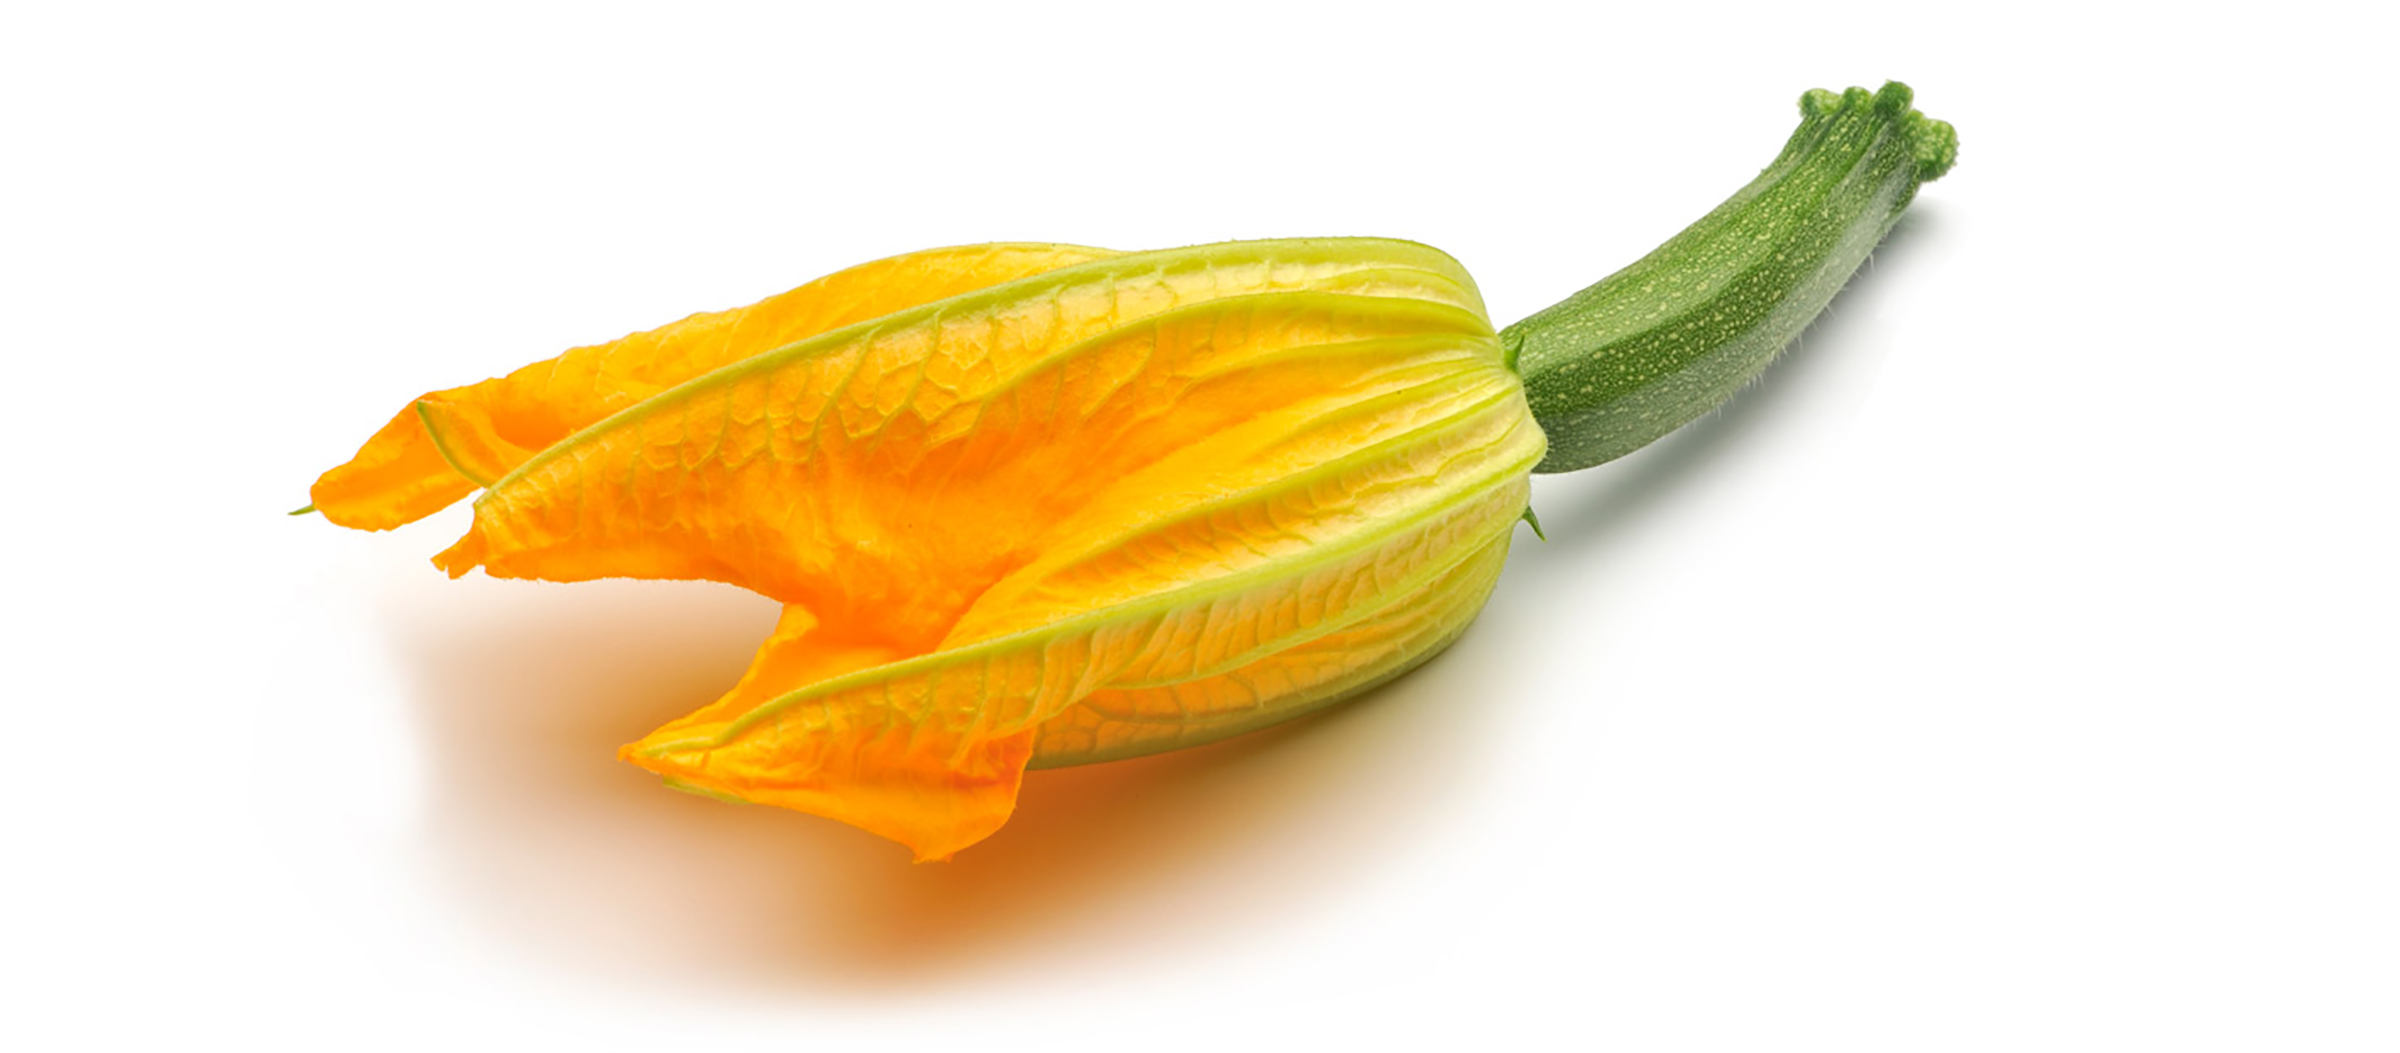 Courgette bloem 177 40g Solucious